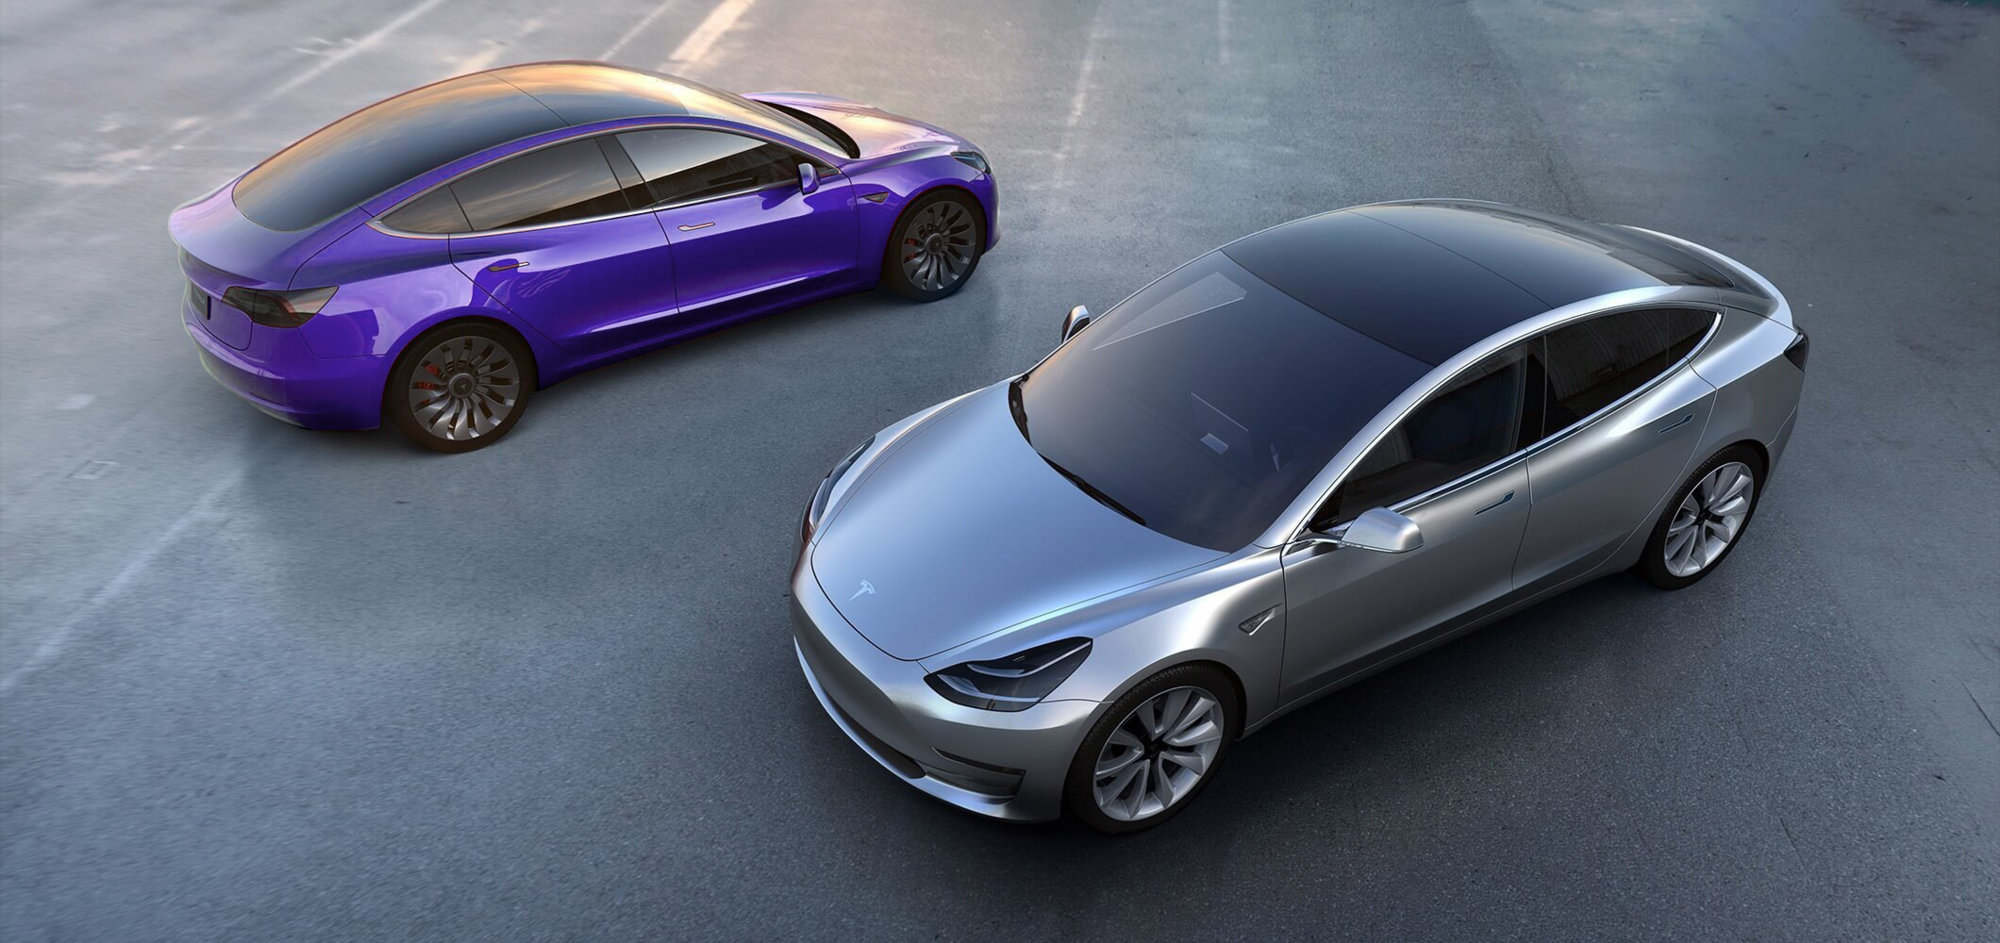 Tesla Model 3 Gets Rendered in Dozens of Colors, Looks Good in All of